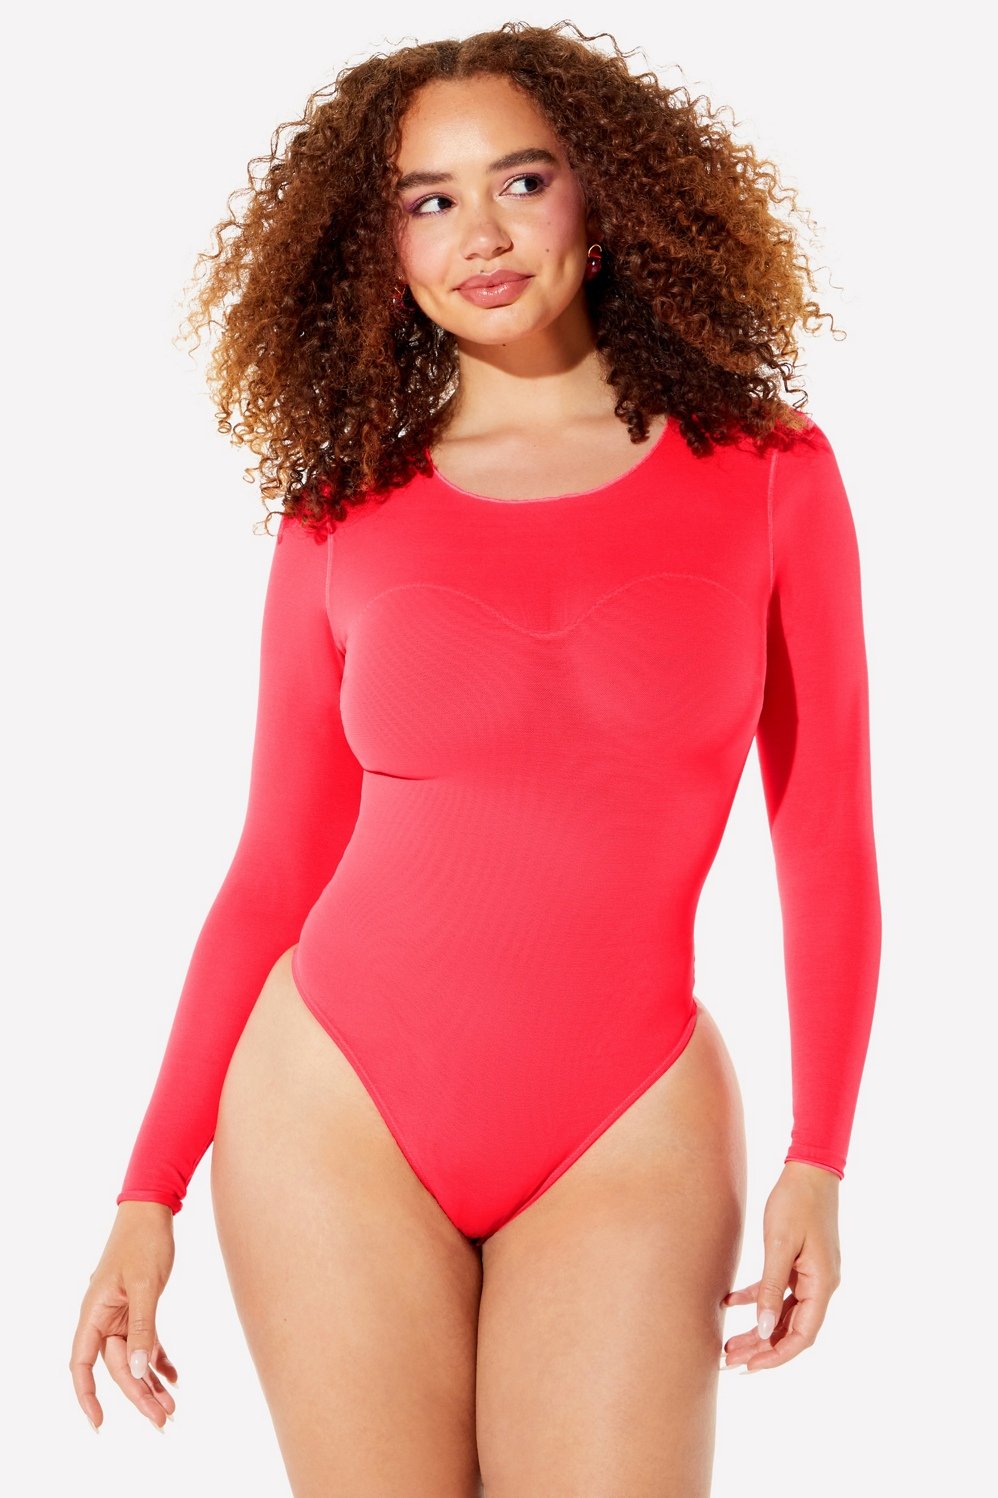 Fabletics Yitty Mesh Me Smoothing Sleeved Thong Bodysuit Size 2X - $75 -  From Caroline